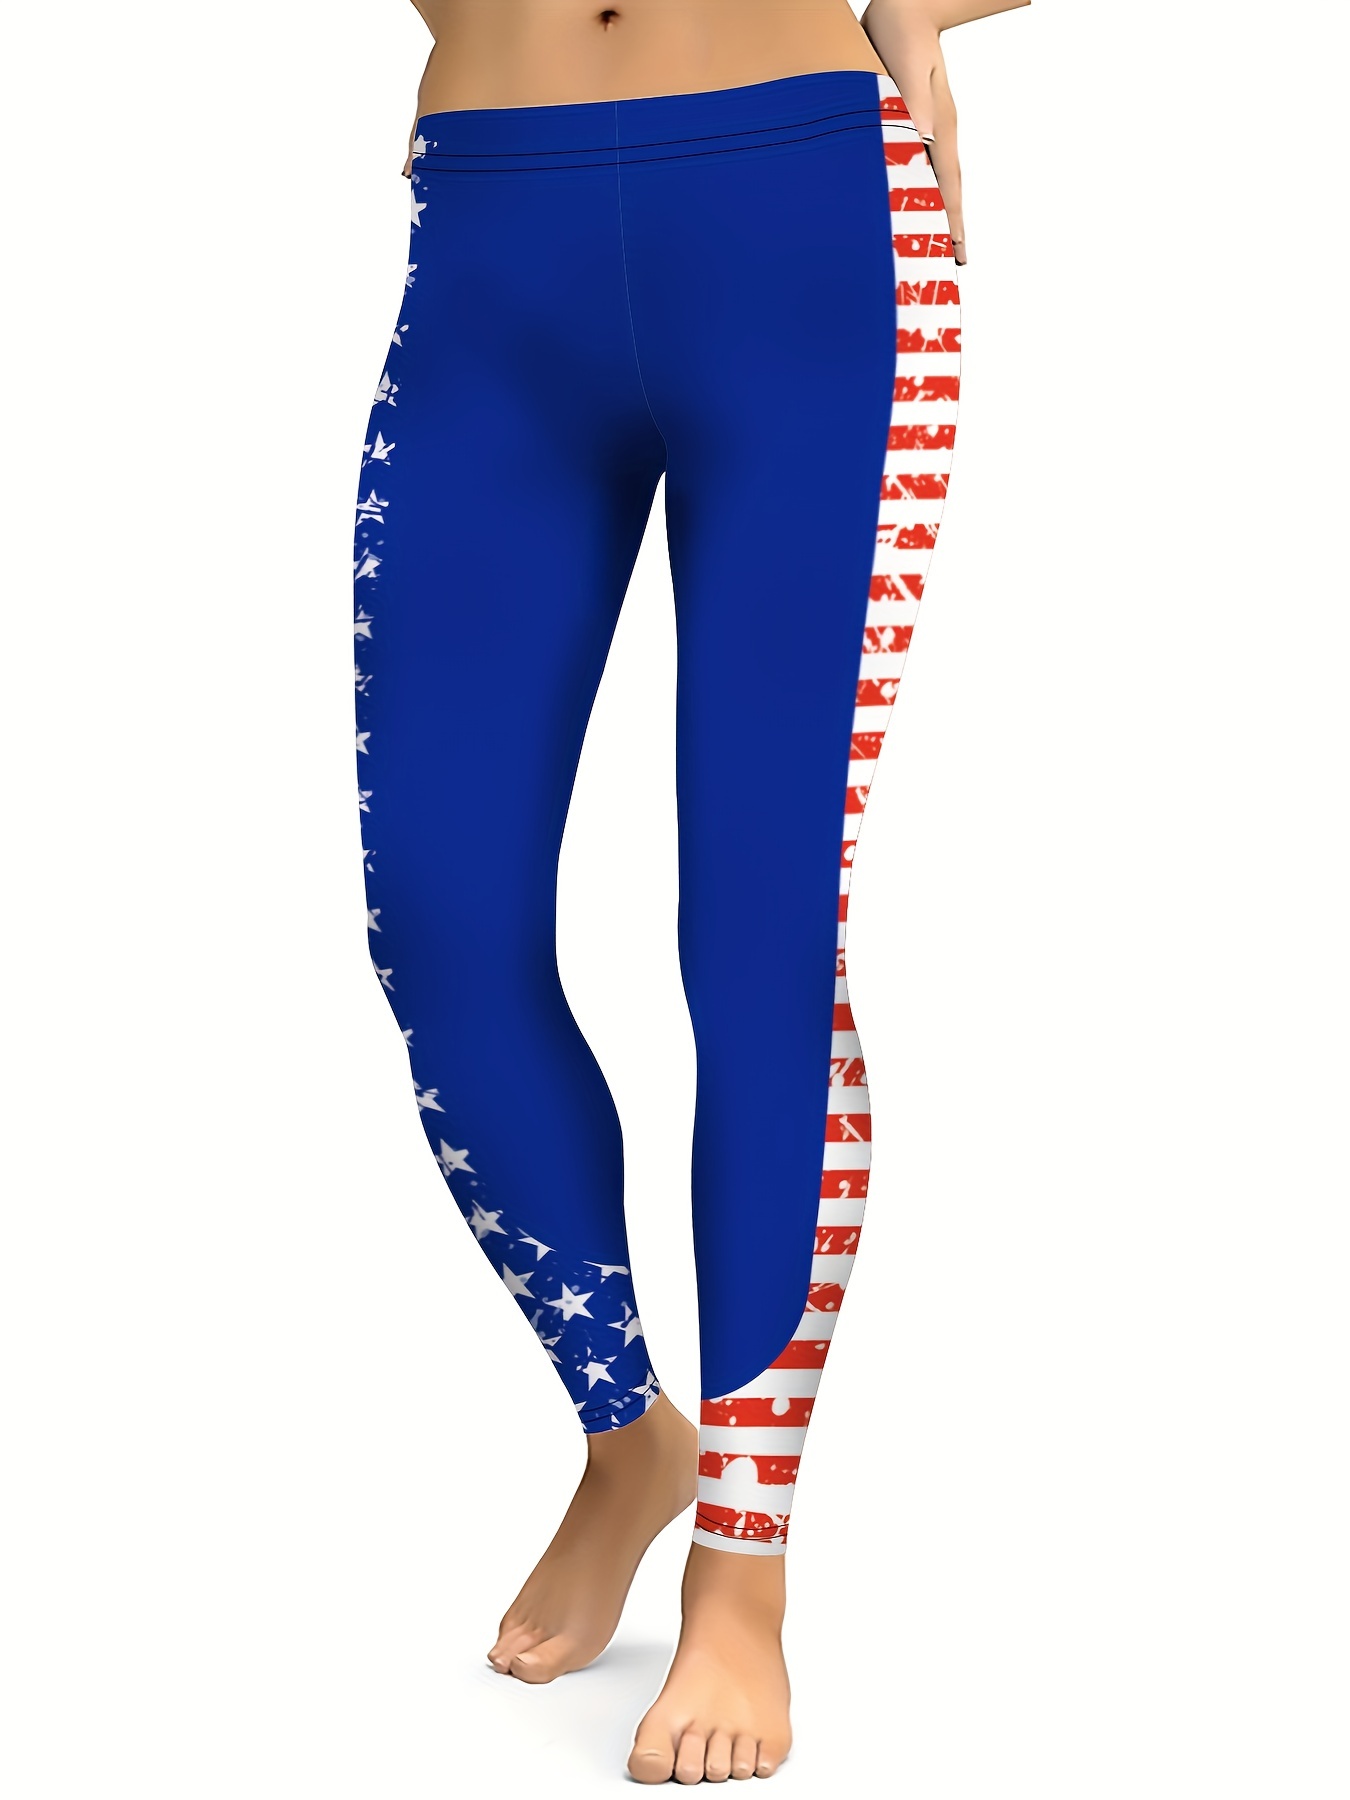 Patriotic Eagle Yoga Pants For Women - High Stretch Workout